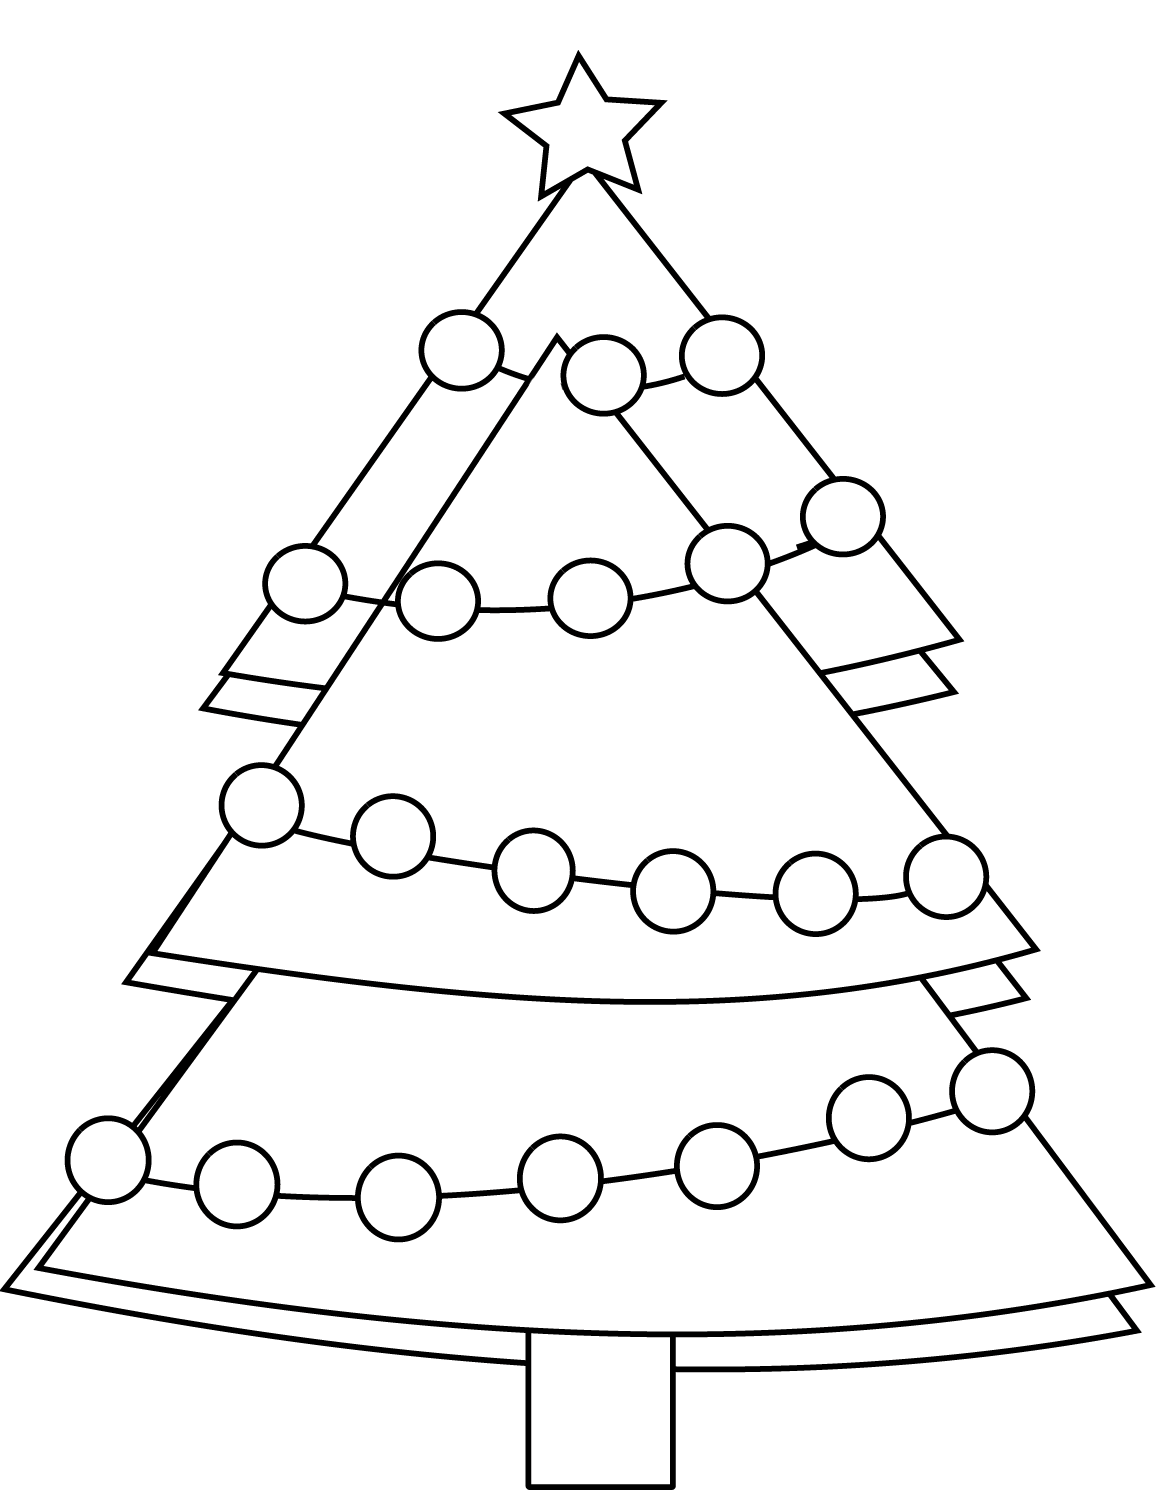 Garland coloring pages to download and print for free